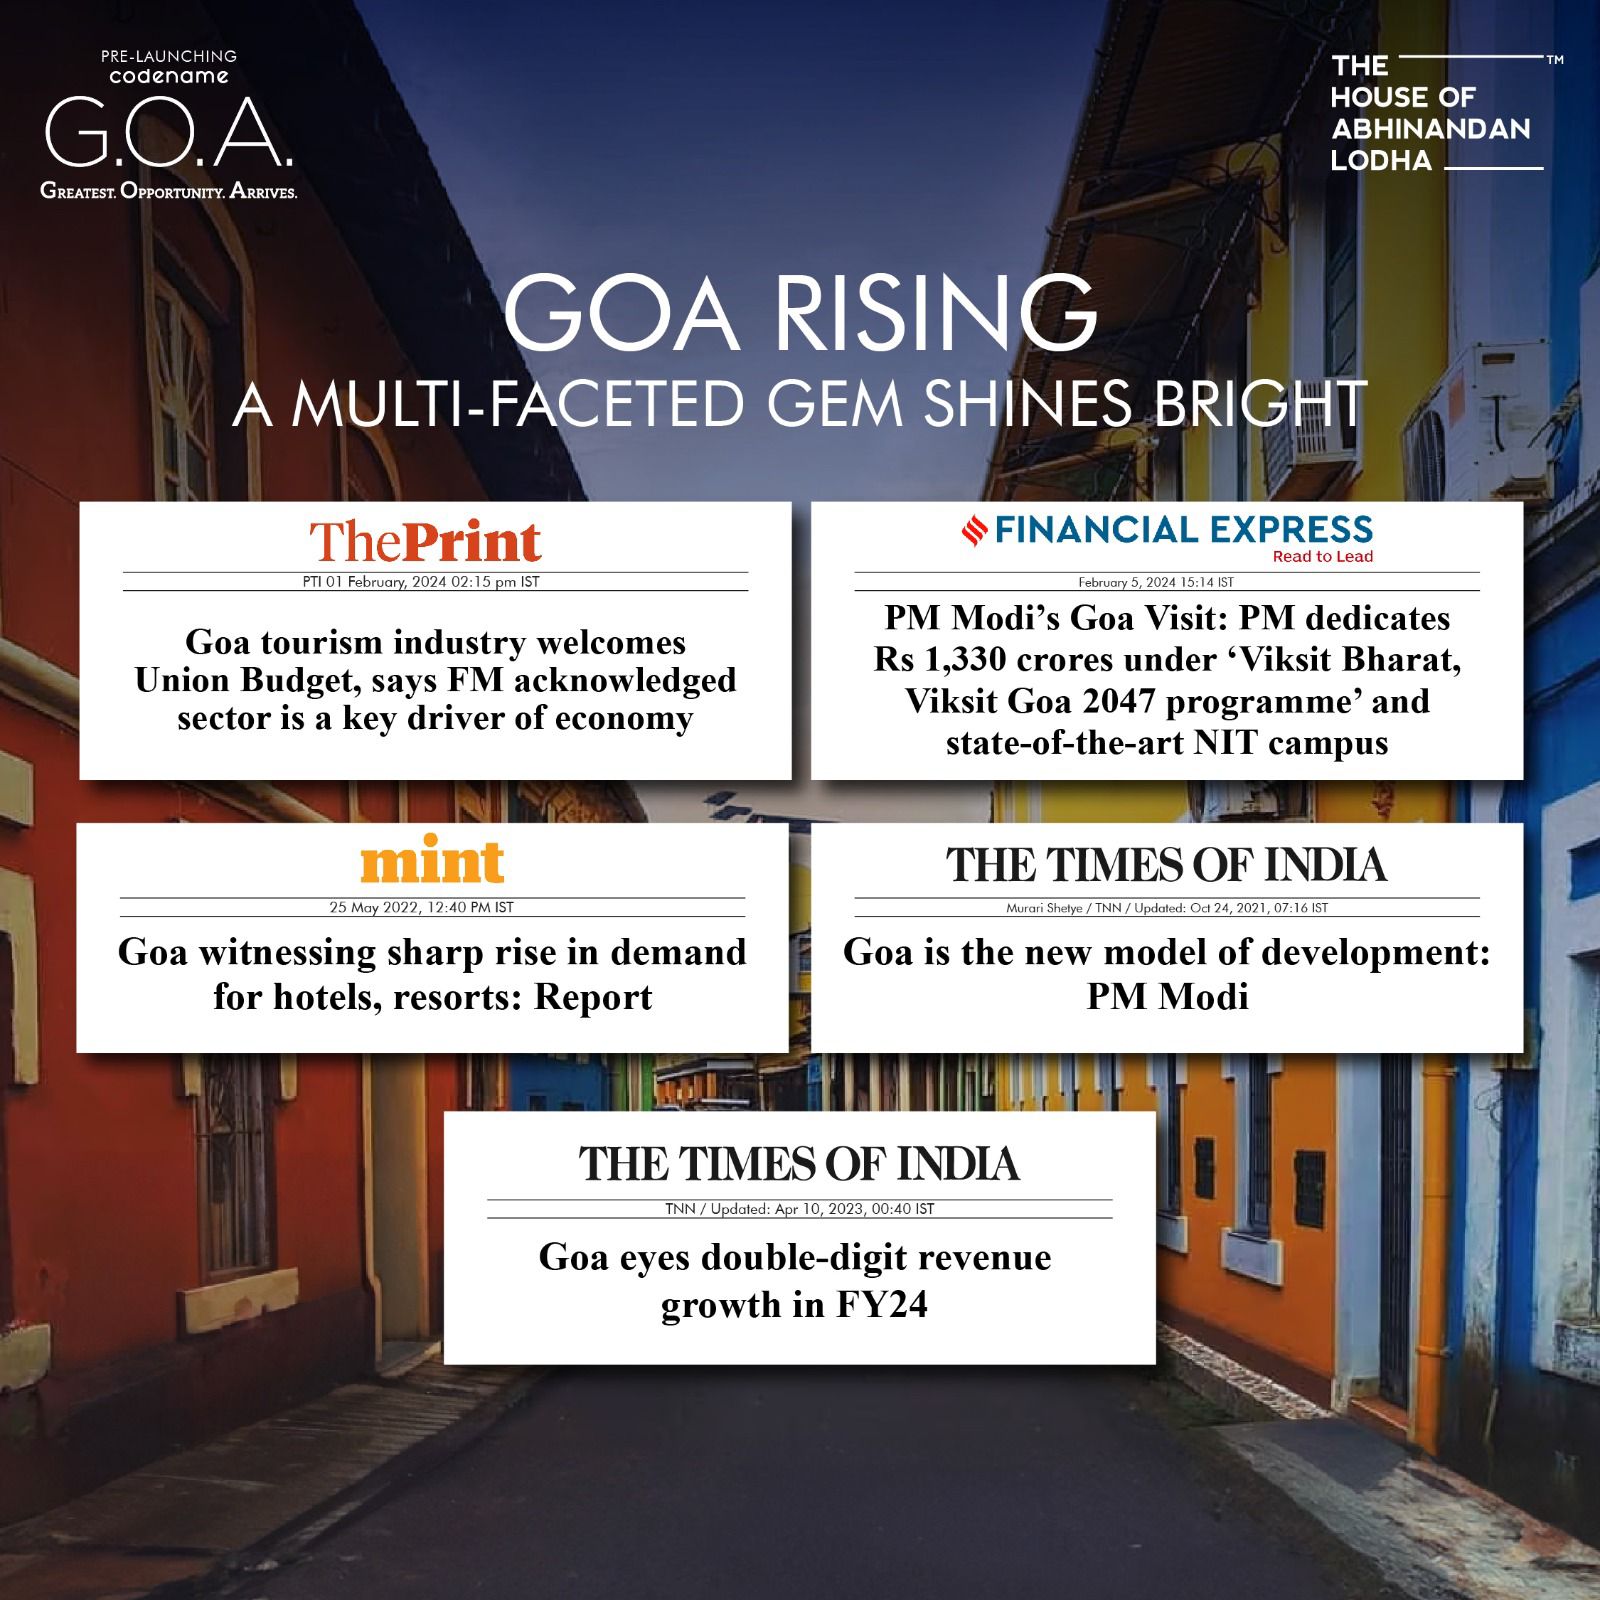 The House of Abhinandan Lodha Celebrates Goa's Economic Surge with Pre-Launch of G.O.A. Project Update